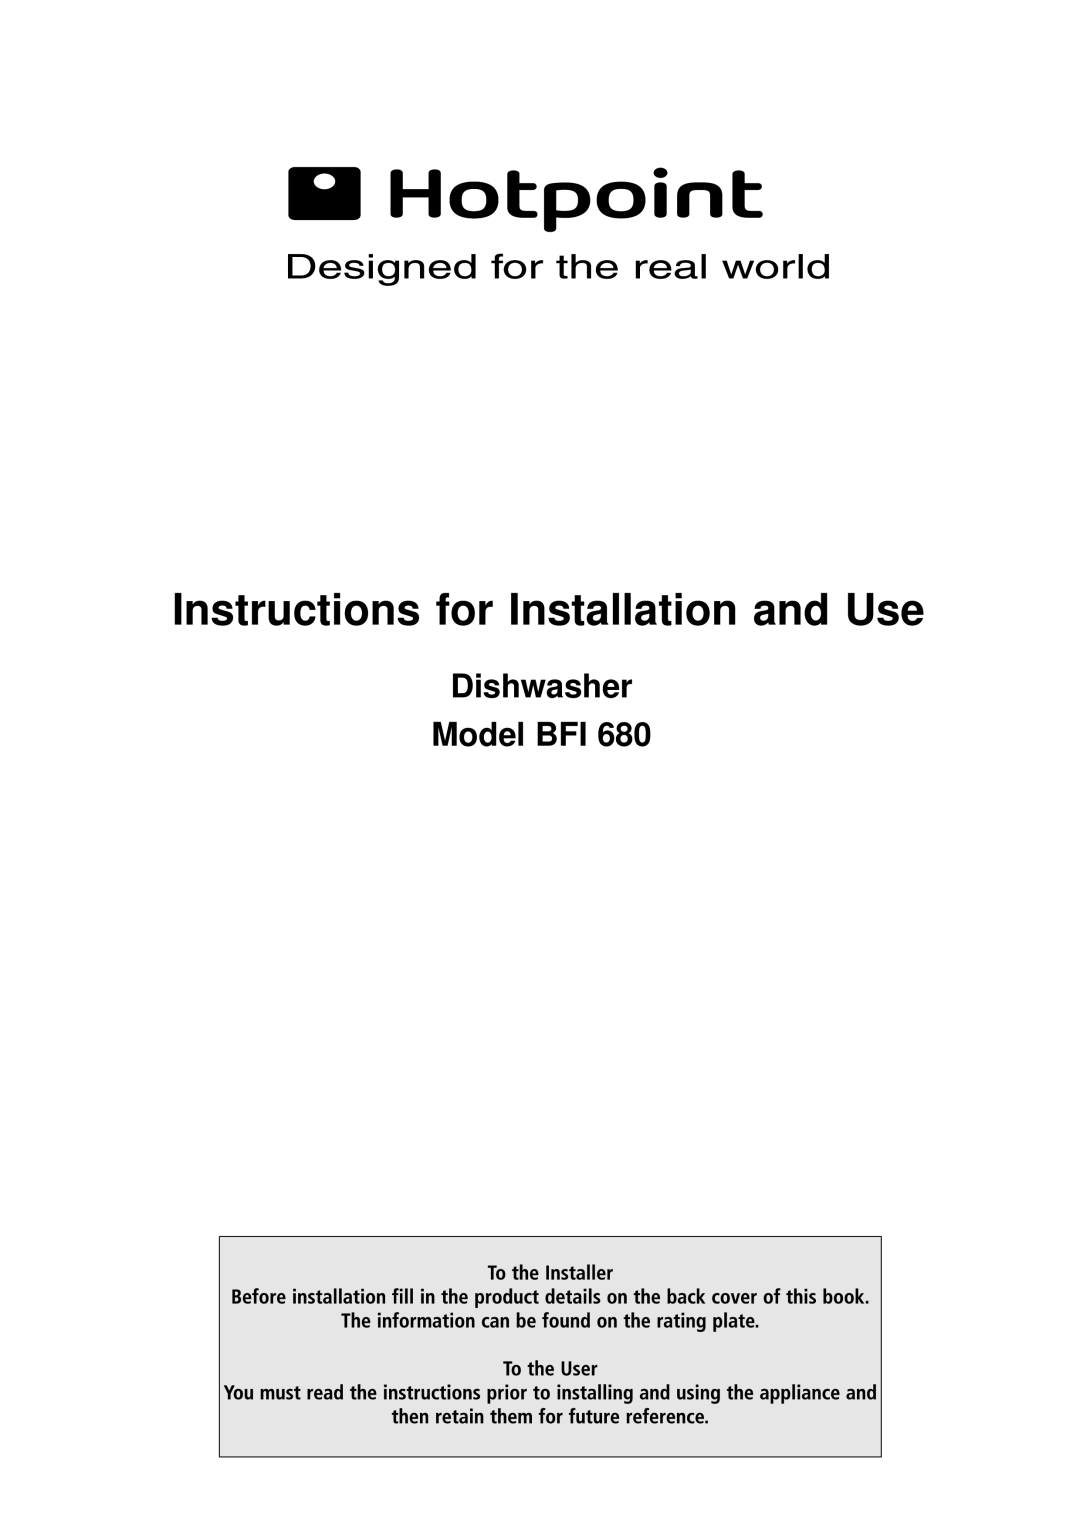 Hotpoint BFI 680 manual Instructions for Installation and Use, Dishwasher Model BFI 